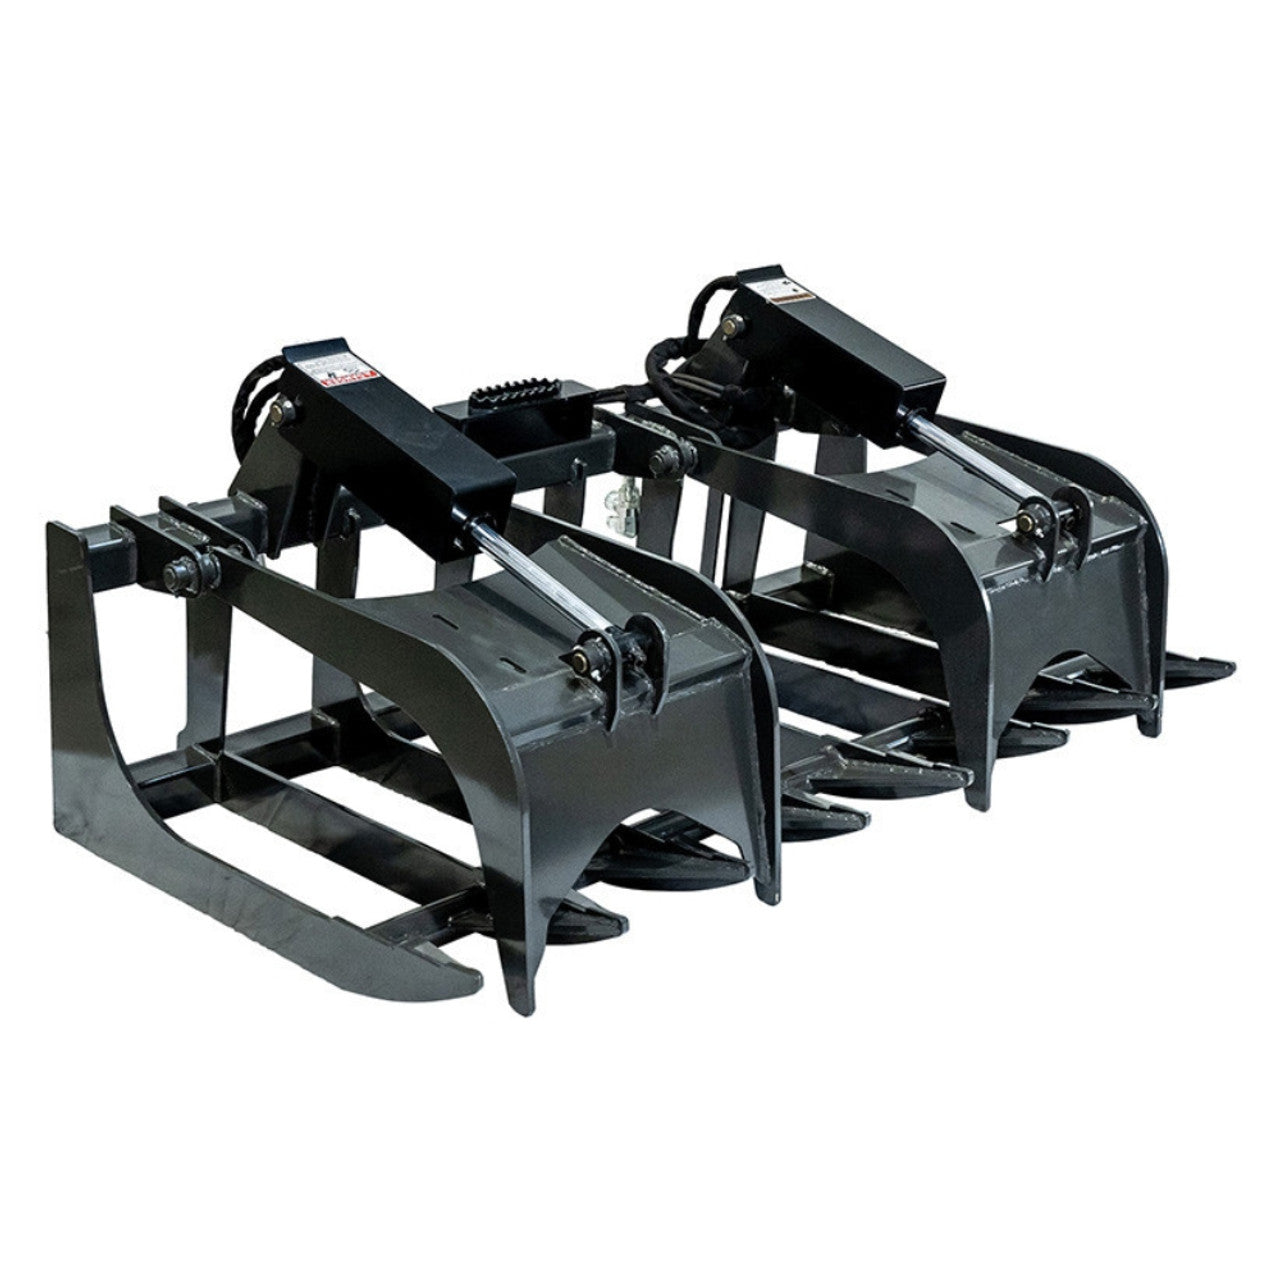 CID 63", 66", 72" STANDARD DUTY ROOT GRAPPLE ATTACHMENT FOR SKID STEER